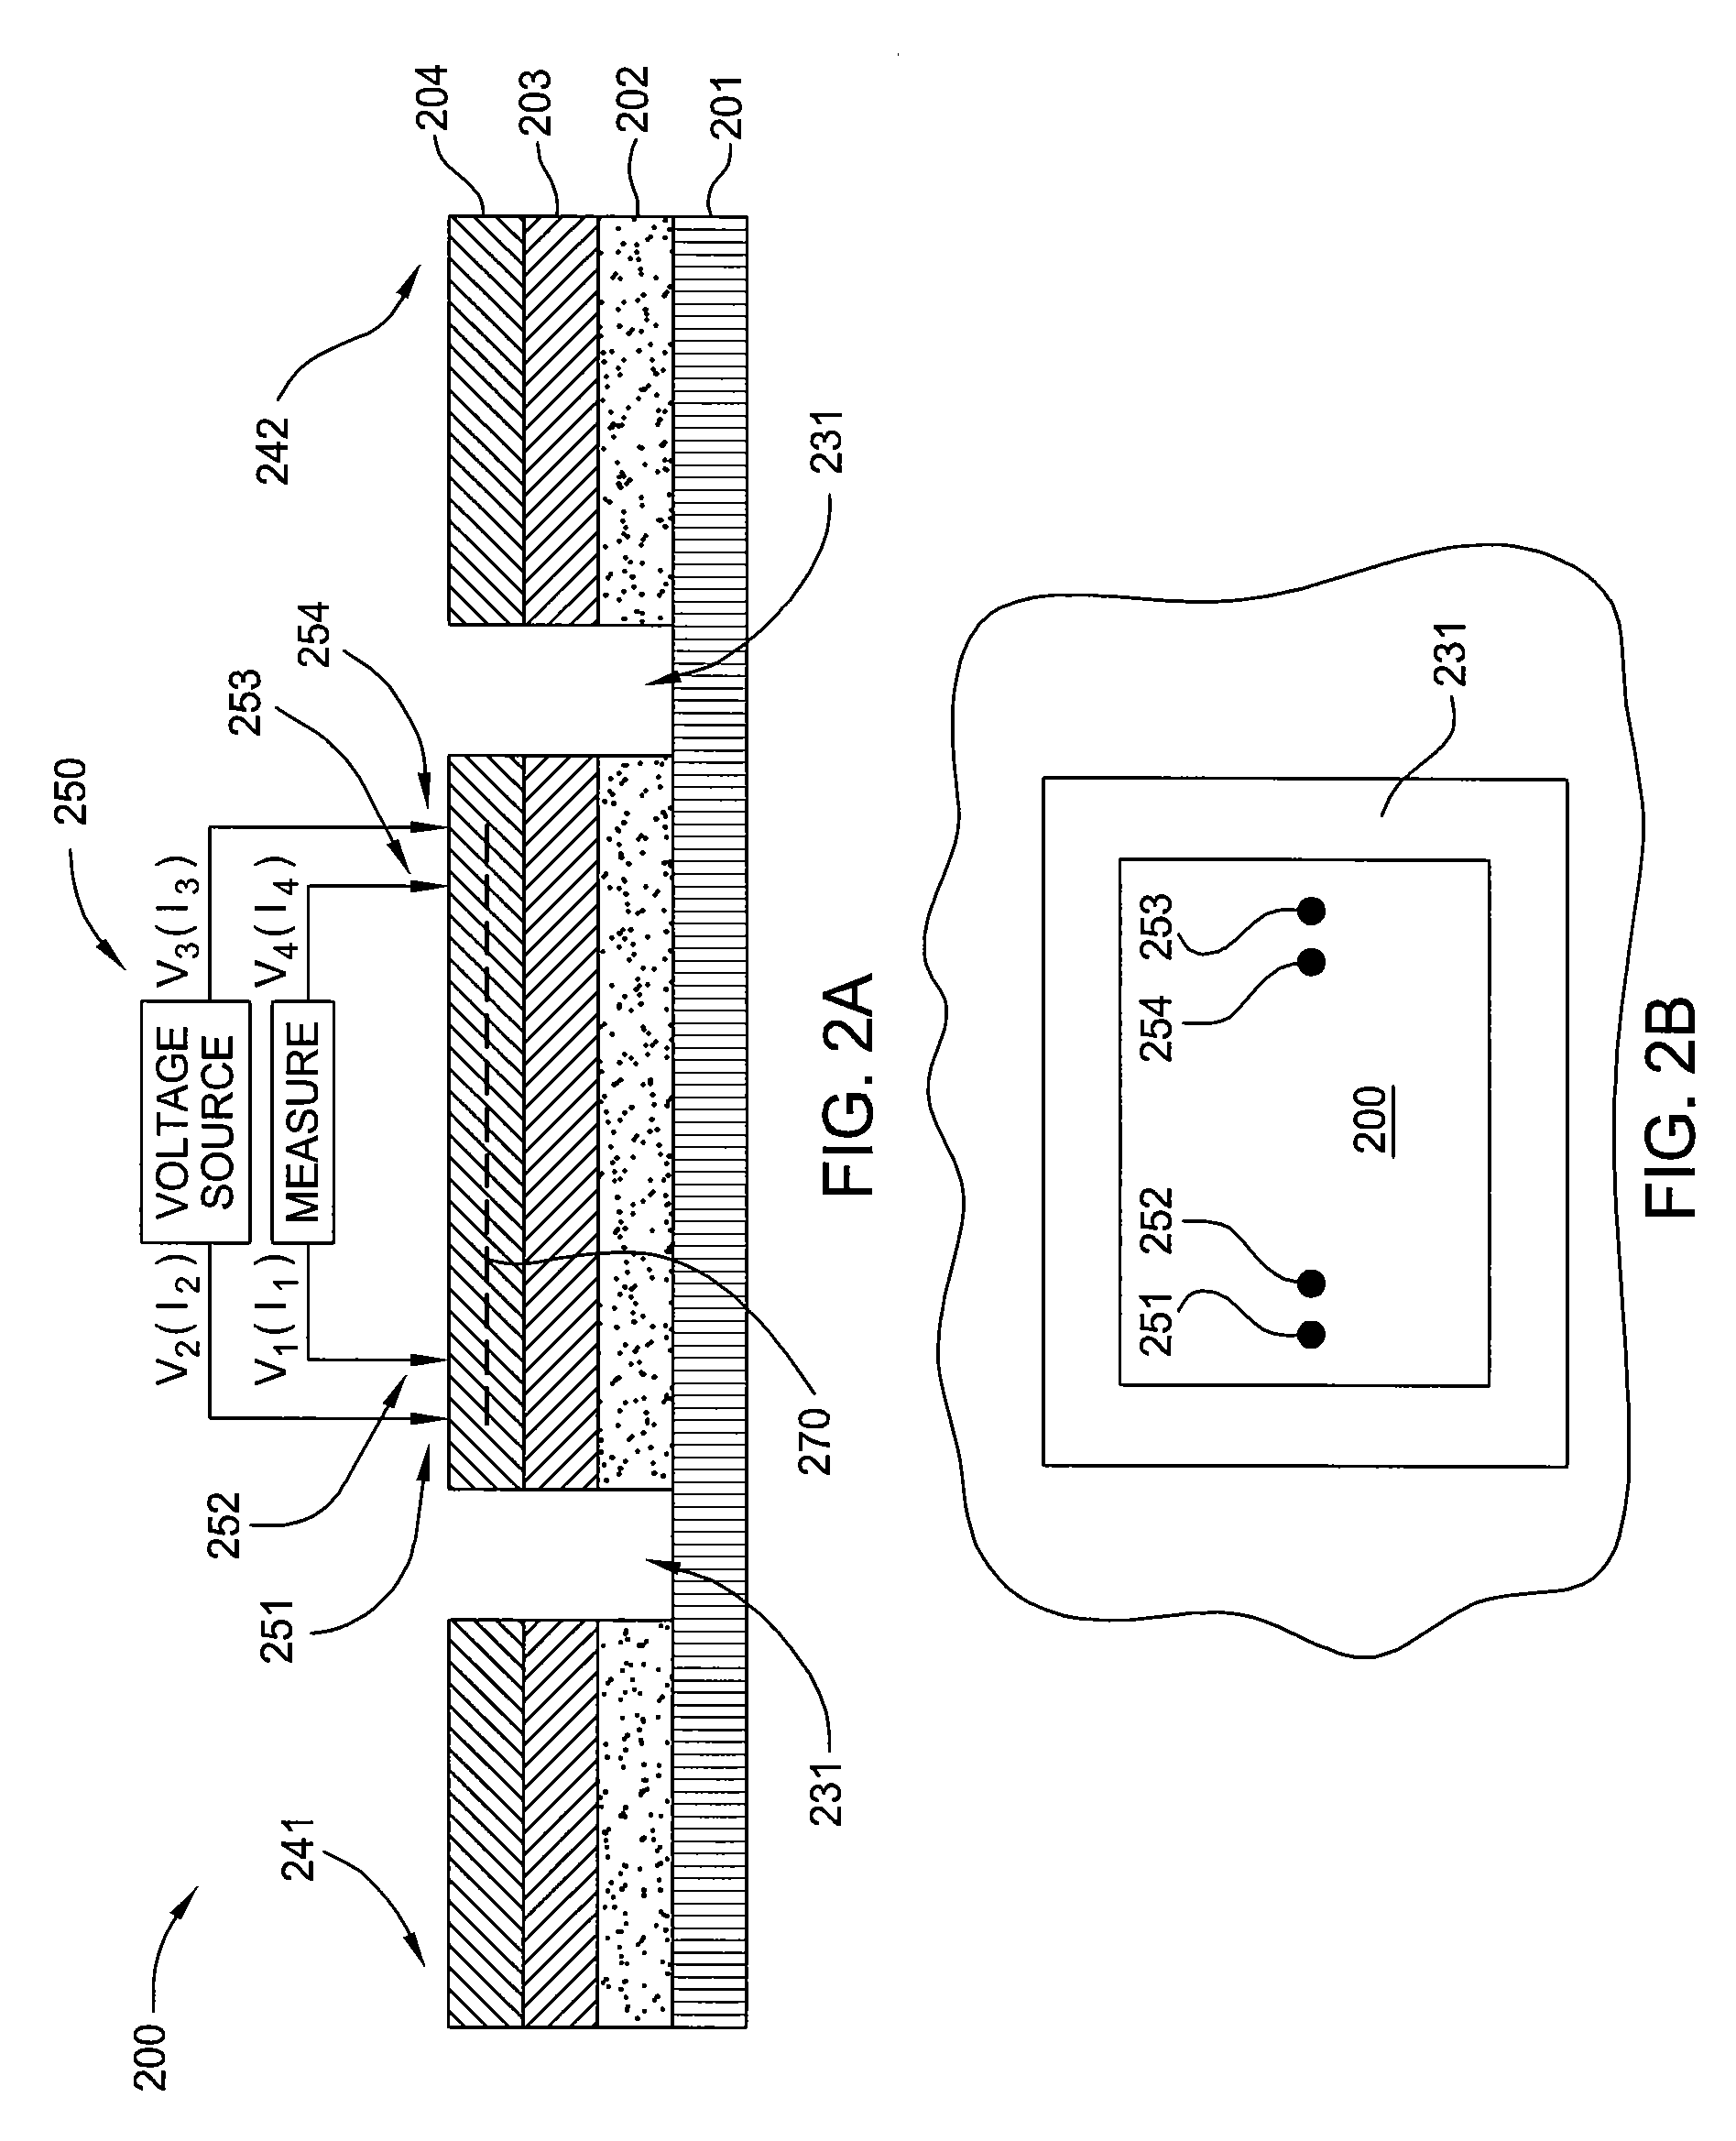 Photovoltaic fabrication process monitoring and control using diagnostic devices